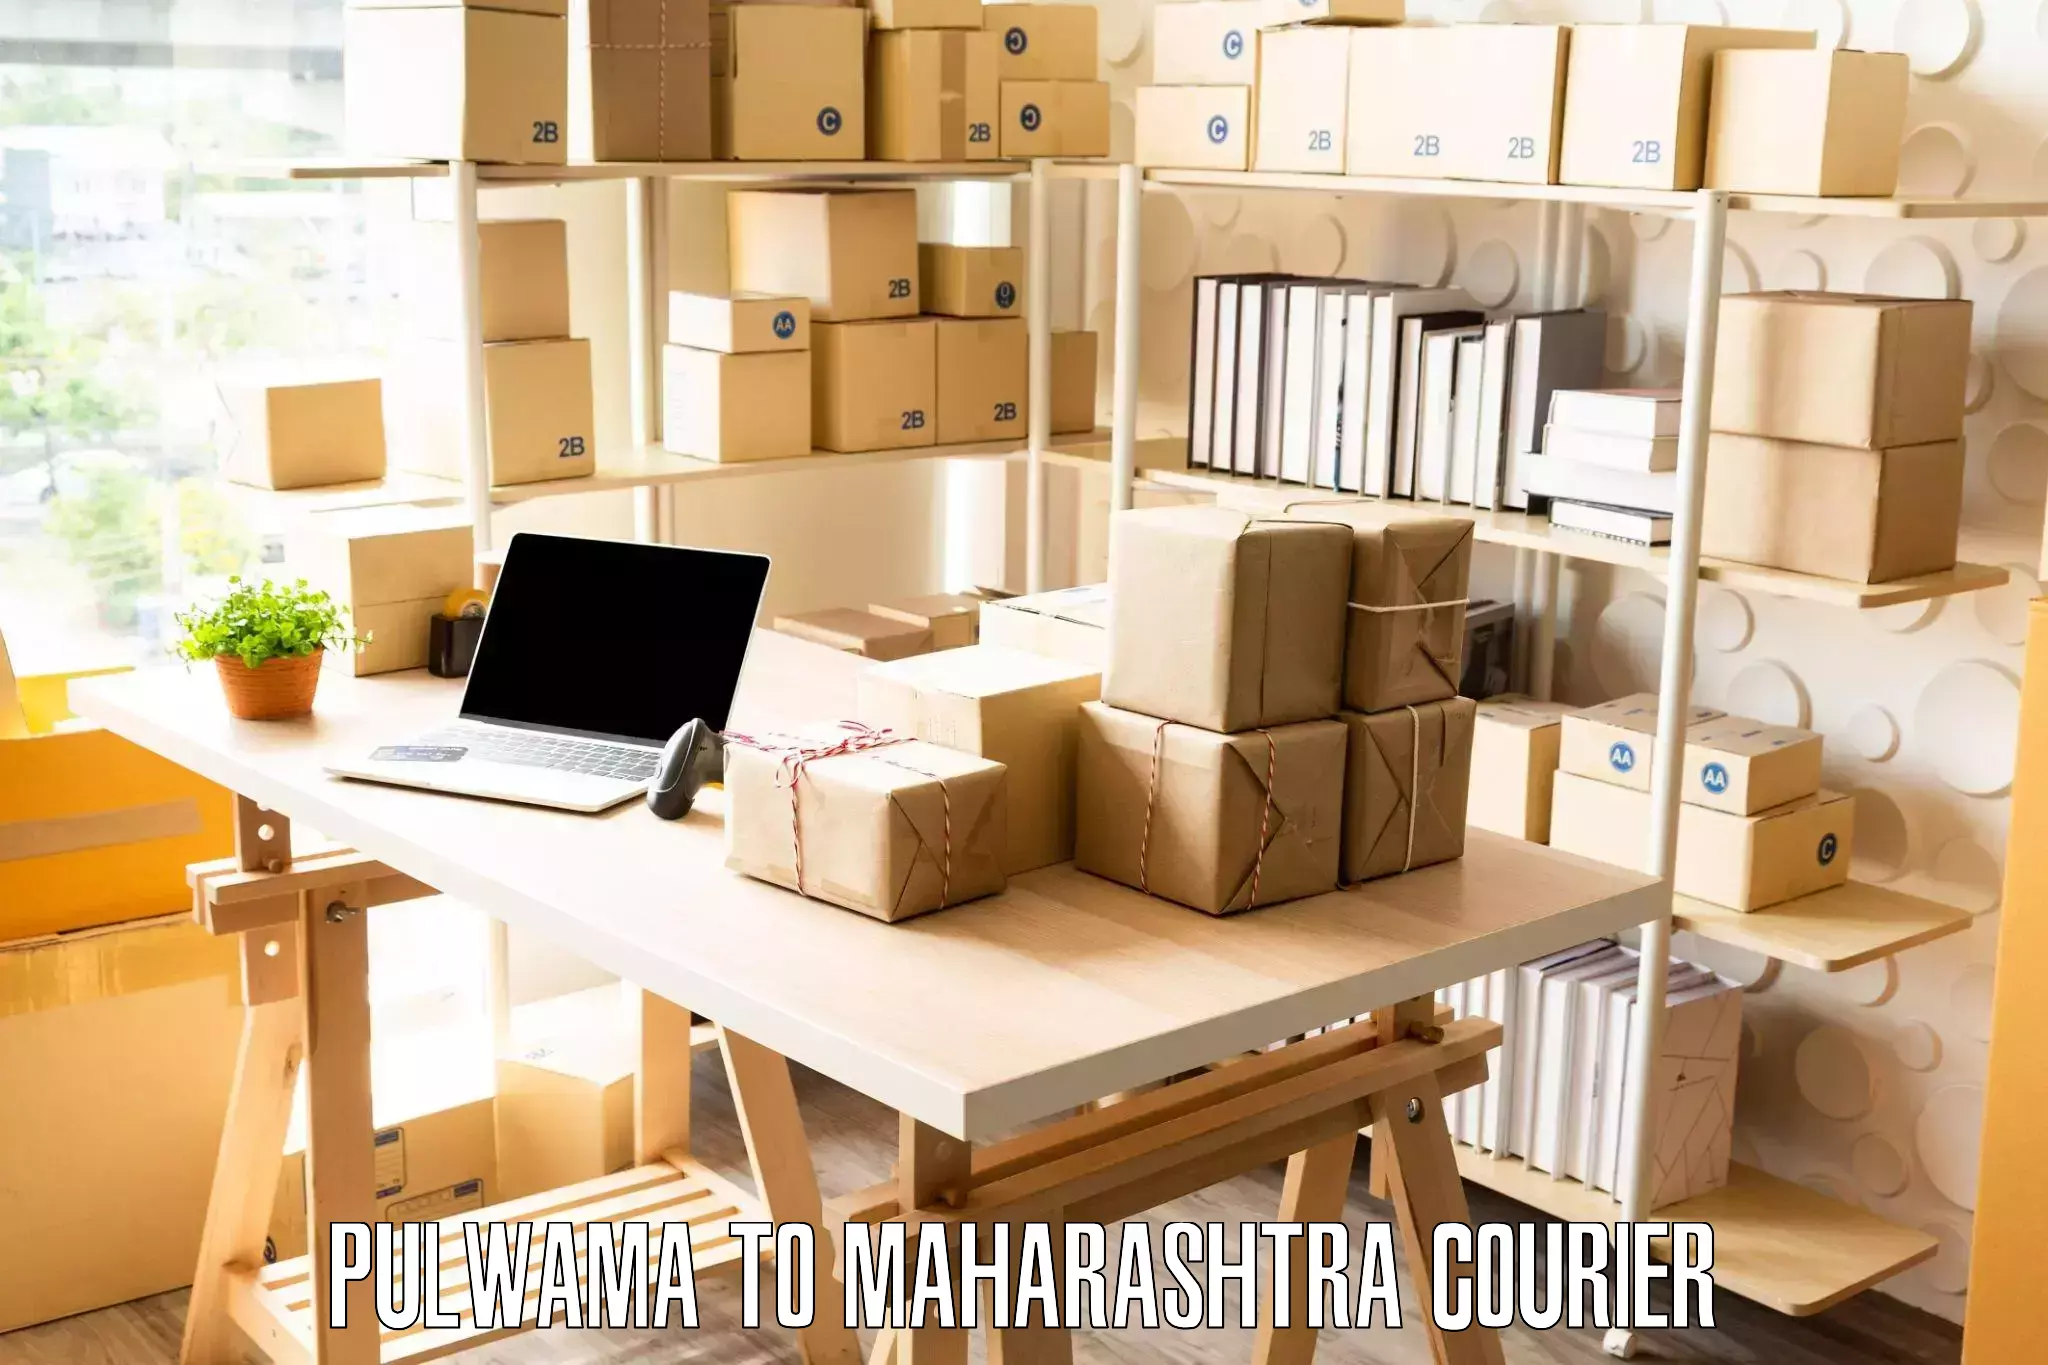 Cost-effective moving options in Pulwama to Panvel